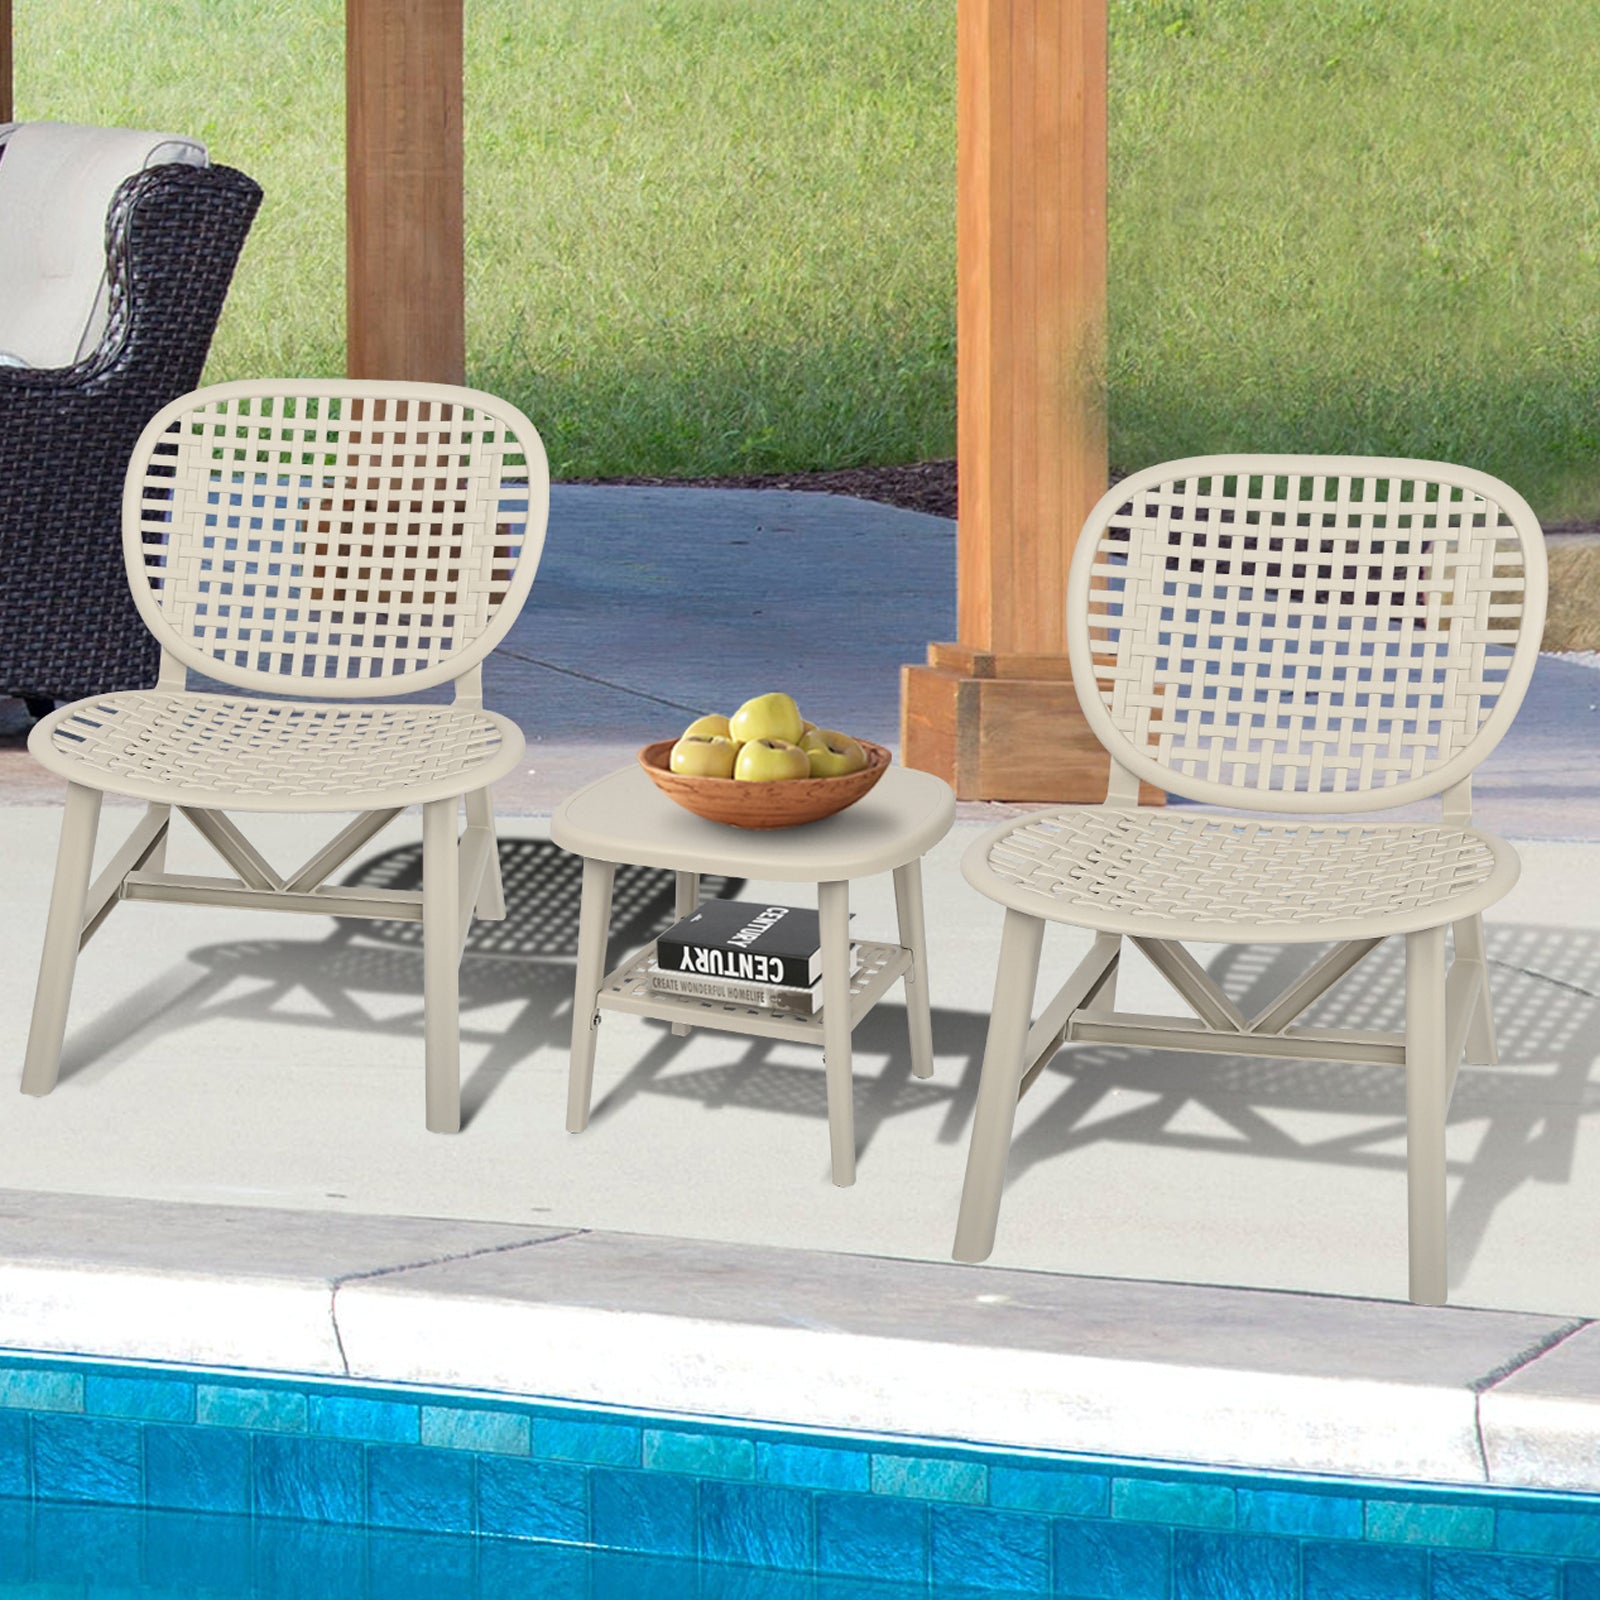 3 Piece Hollow Design Retro Outdoor Patio Table and Lounge Chairs Furniture Set with Open Shelf and Widened Seats (White)